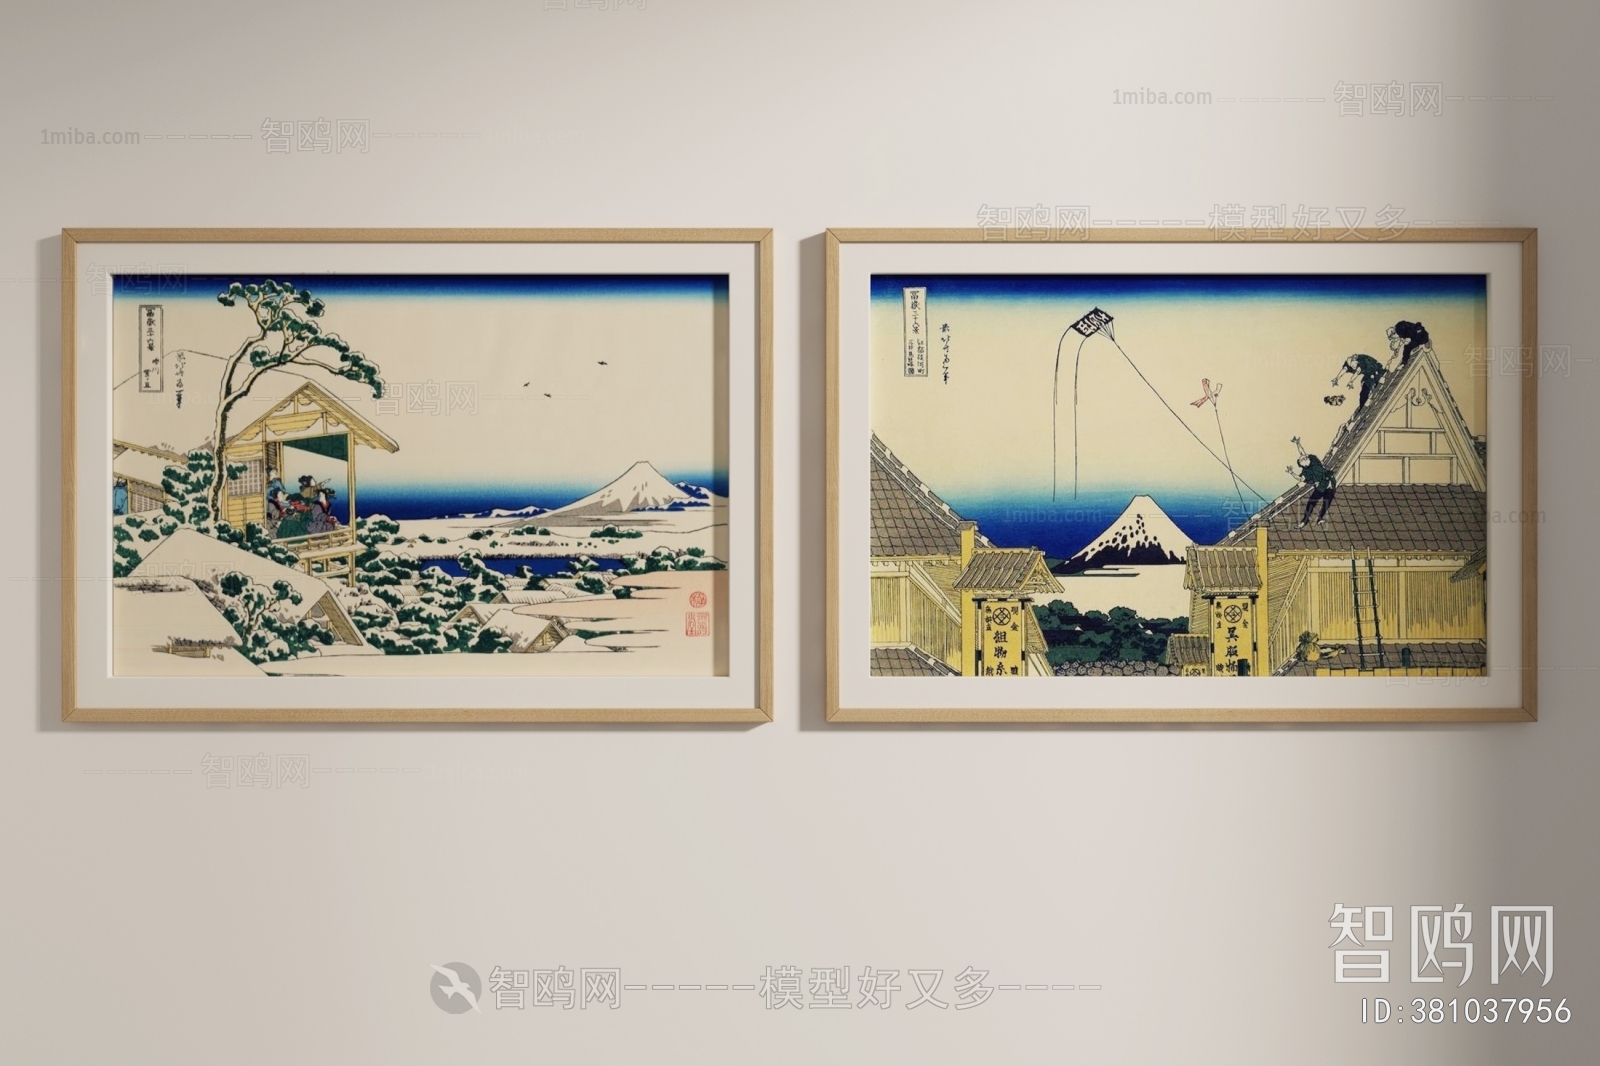 Japanese Style Painting